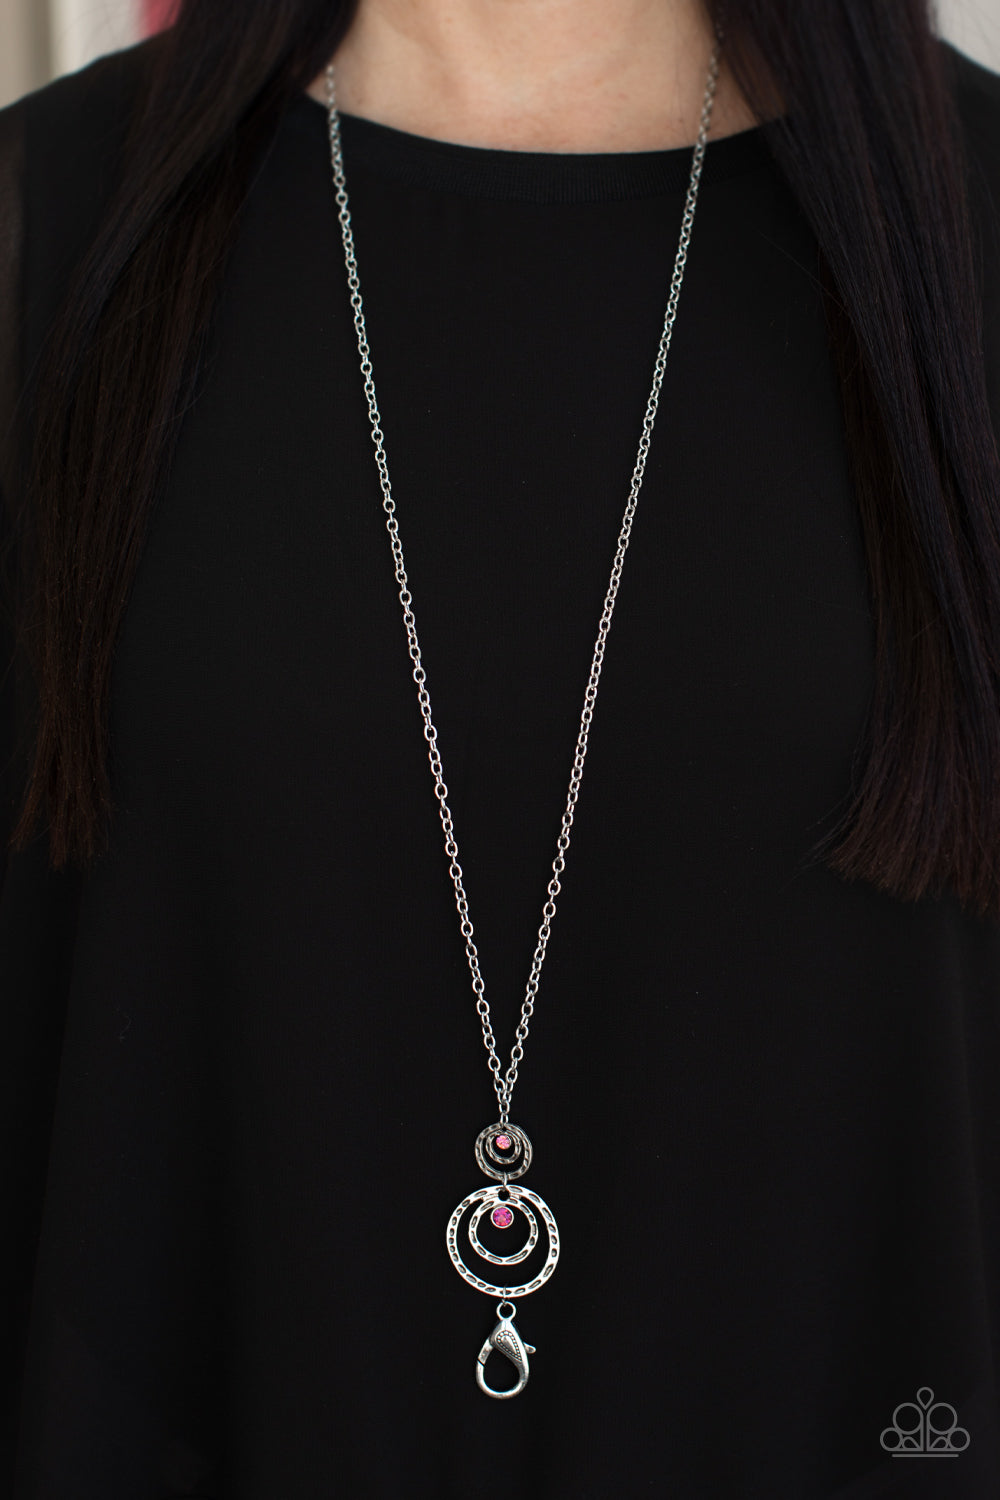 PRE-ORDER - Paparazzi COUTURE Freak - Pink - Lanyard Necklace & Earrings - $5 Jewelry with Ashley Swint